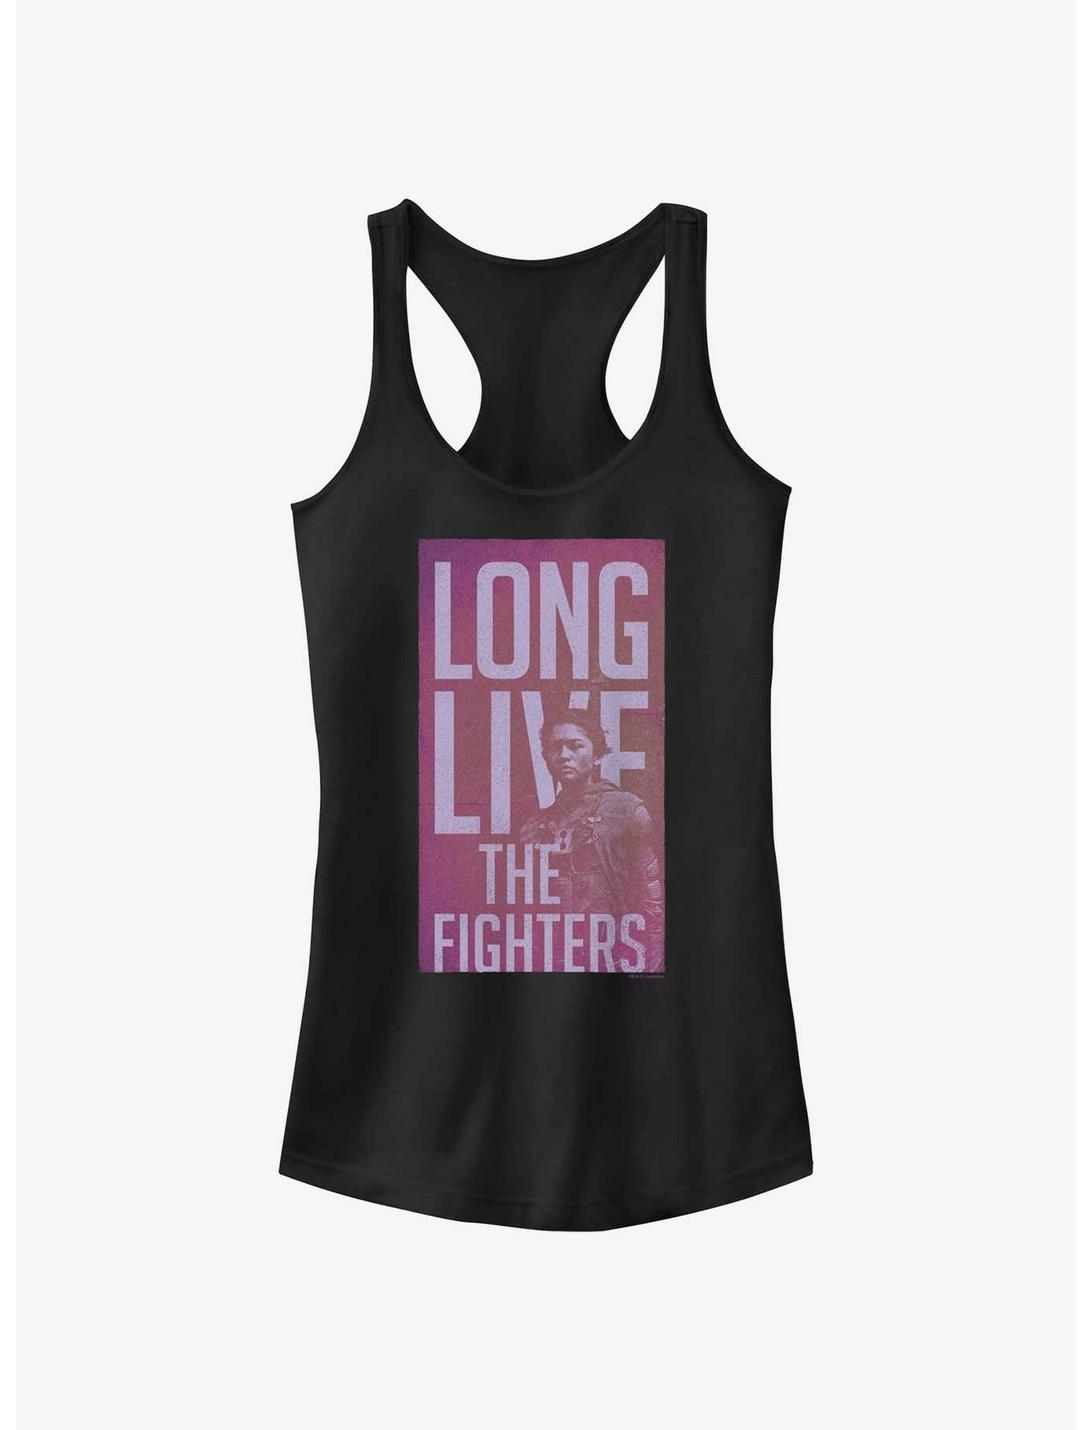 Dune: Part Two Long Live The Fighters Chani Girls Tank, BLACK, hi-res